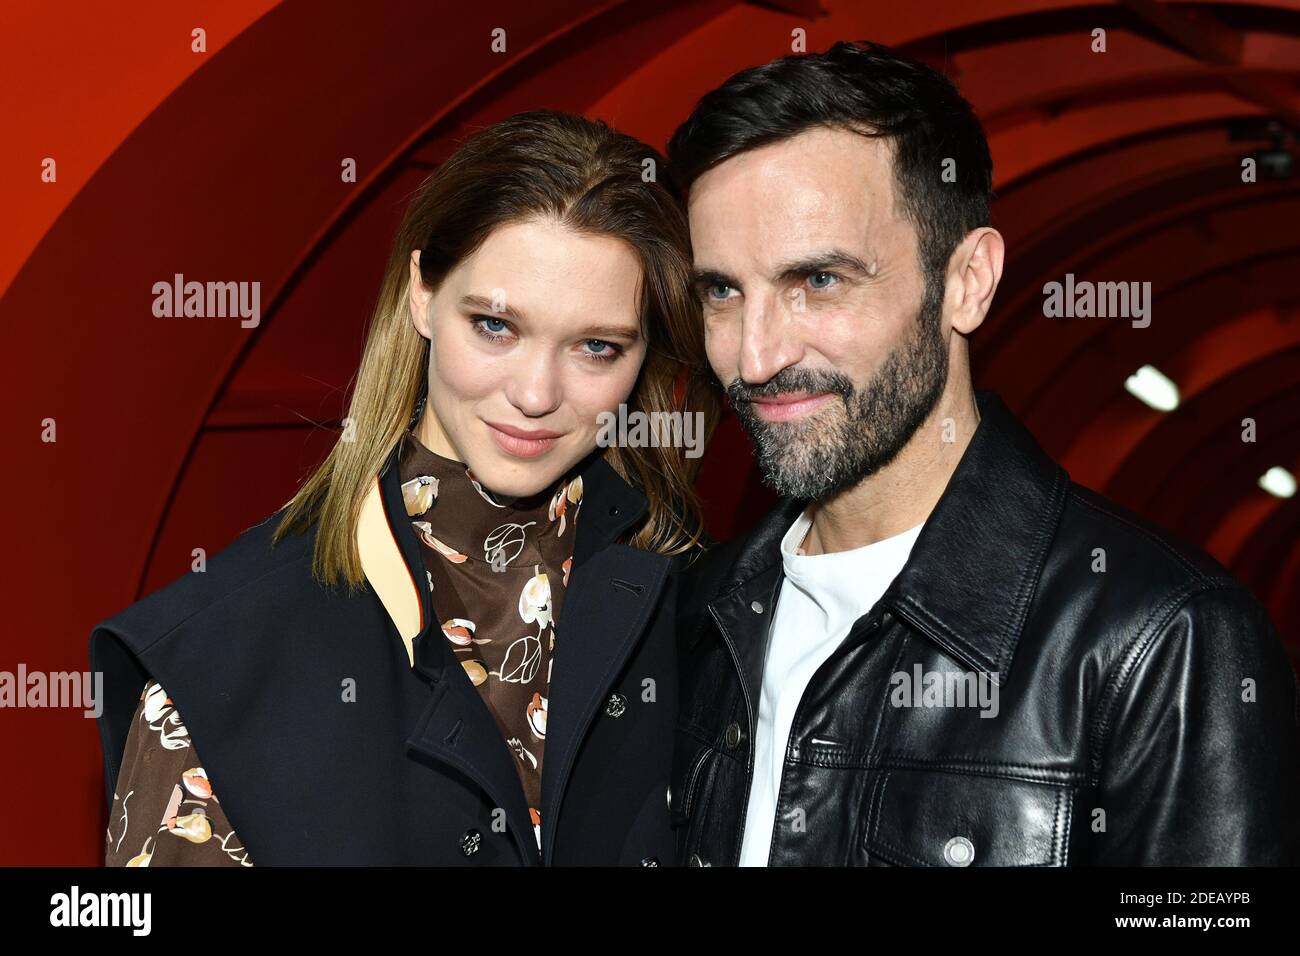 Lea Seydoux and Stylist Nicolas Ghesquiere pose after the Louis Vuitton  show as part of the Paris Fashion Week Womenswear Fall/Winter 2019/2020 on  March 05, 2019 in Paris, France. Photo by Laurent